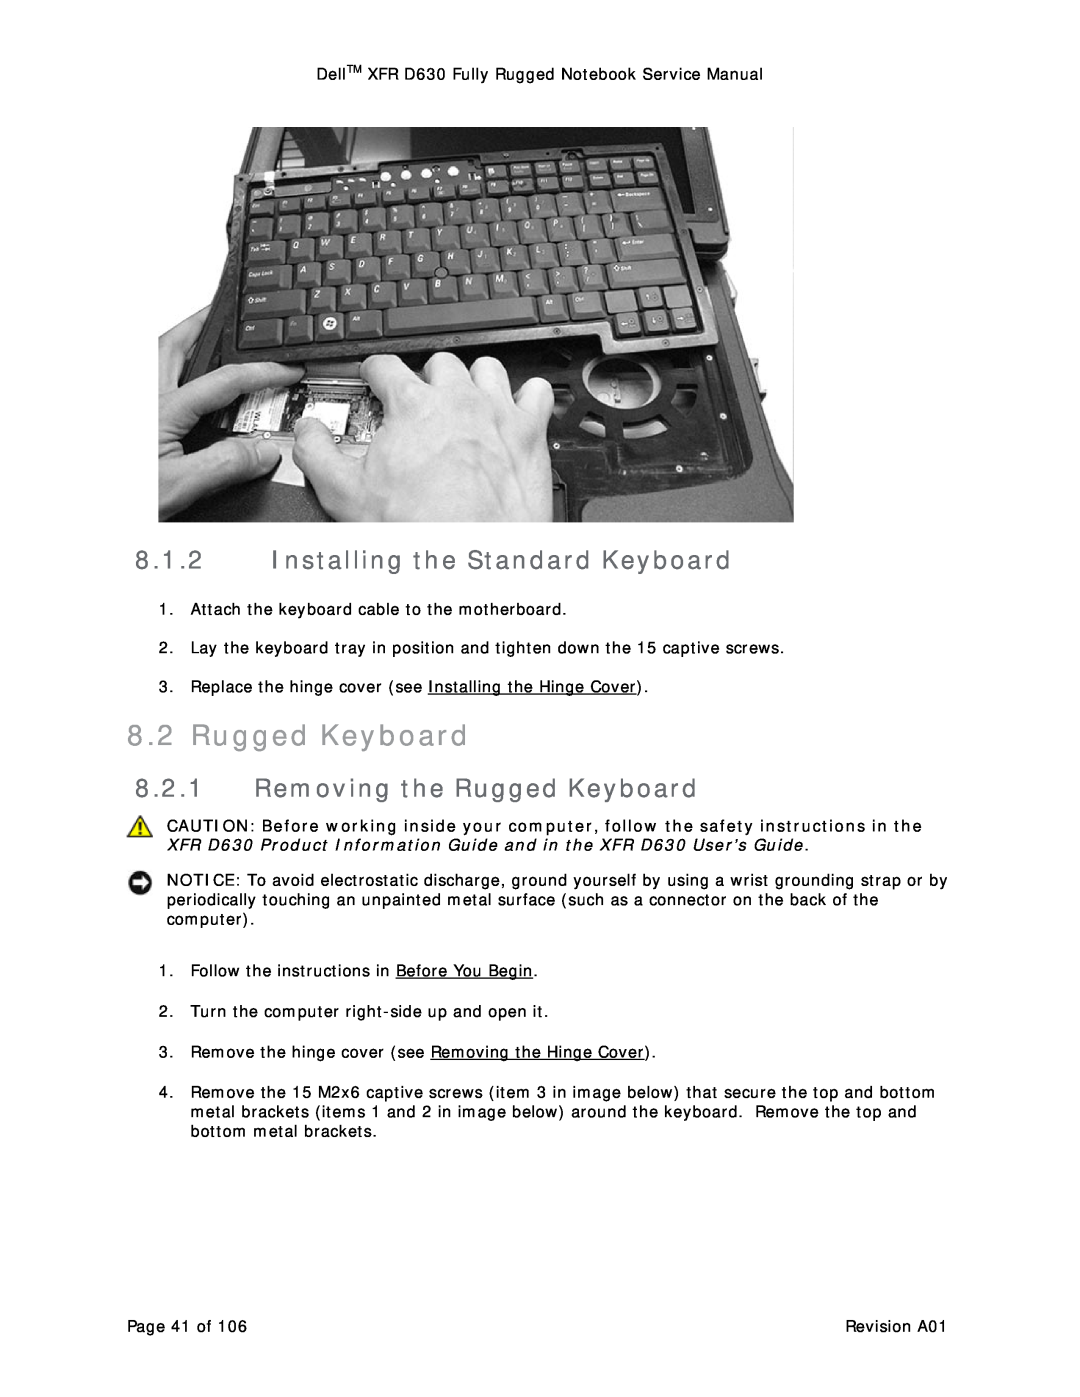 Dell D630 service manual Installing the Standard Keyboard, Removing the Rugged Keyboard 